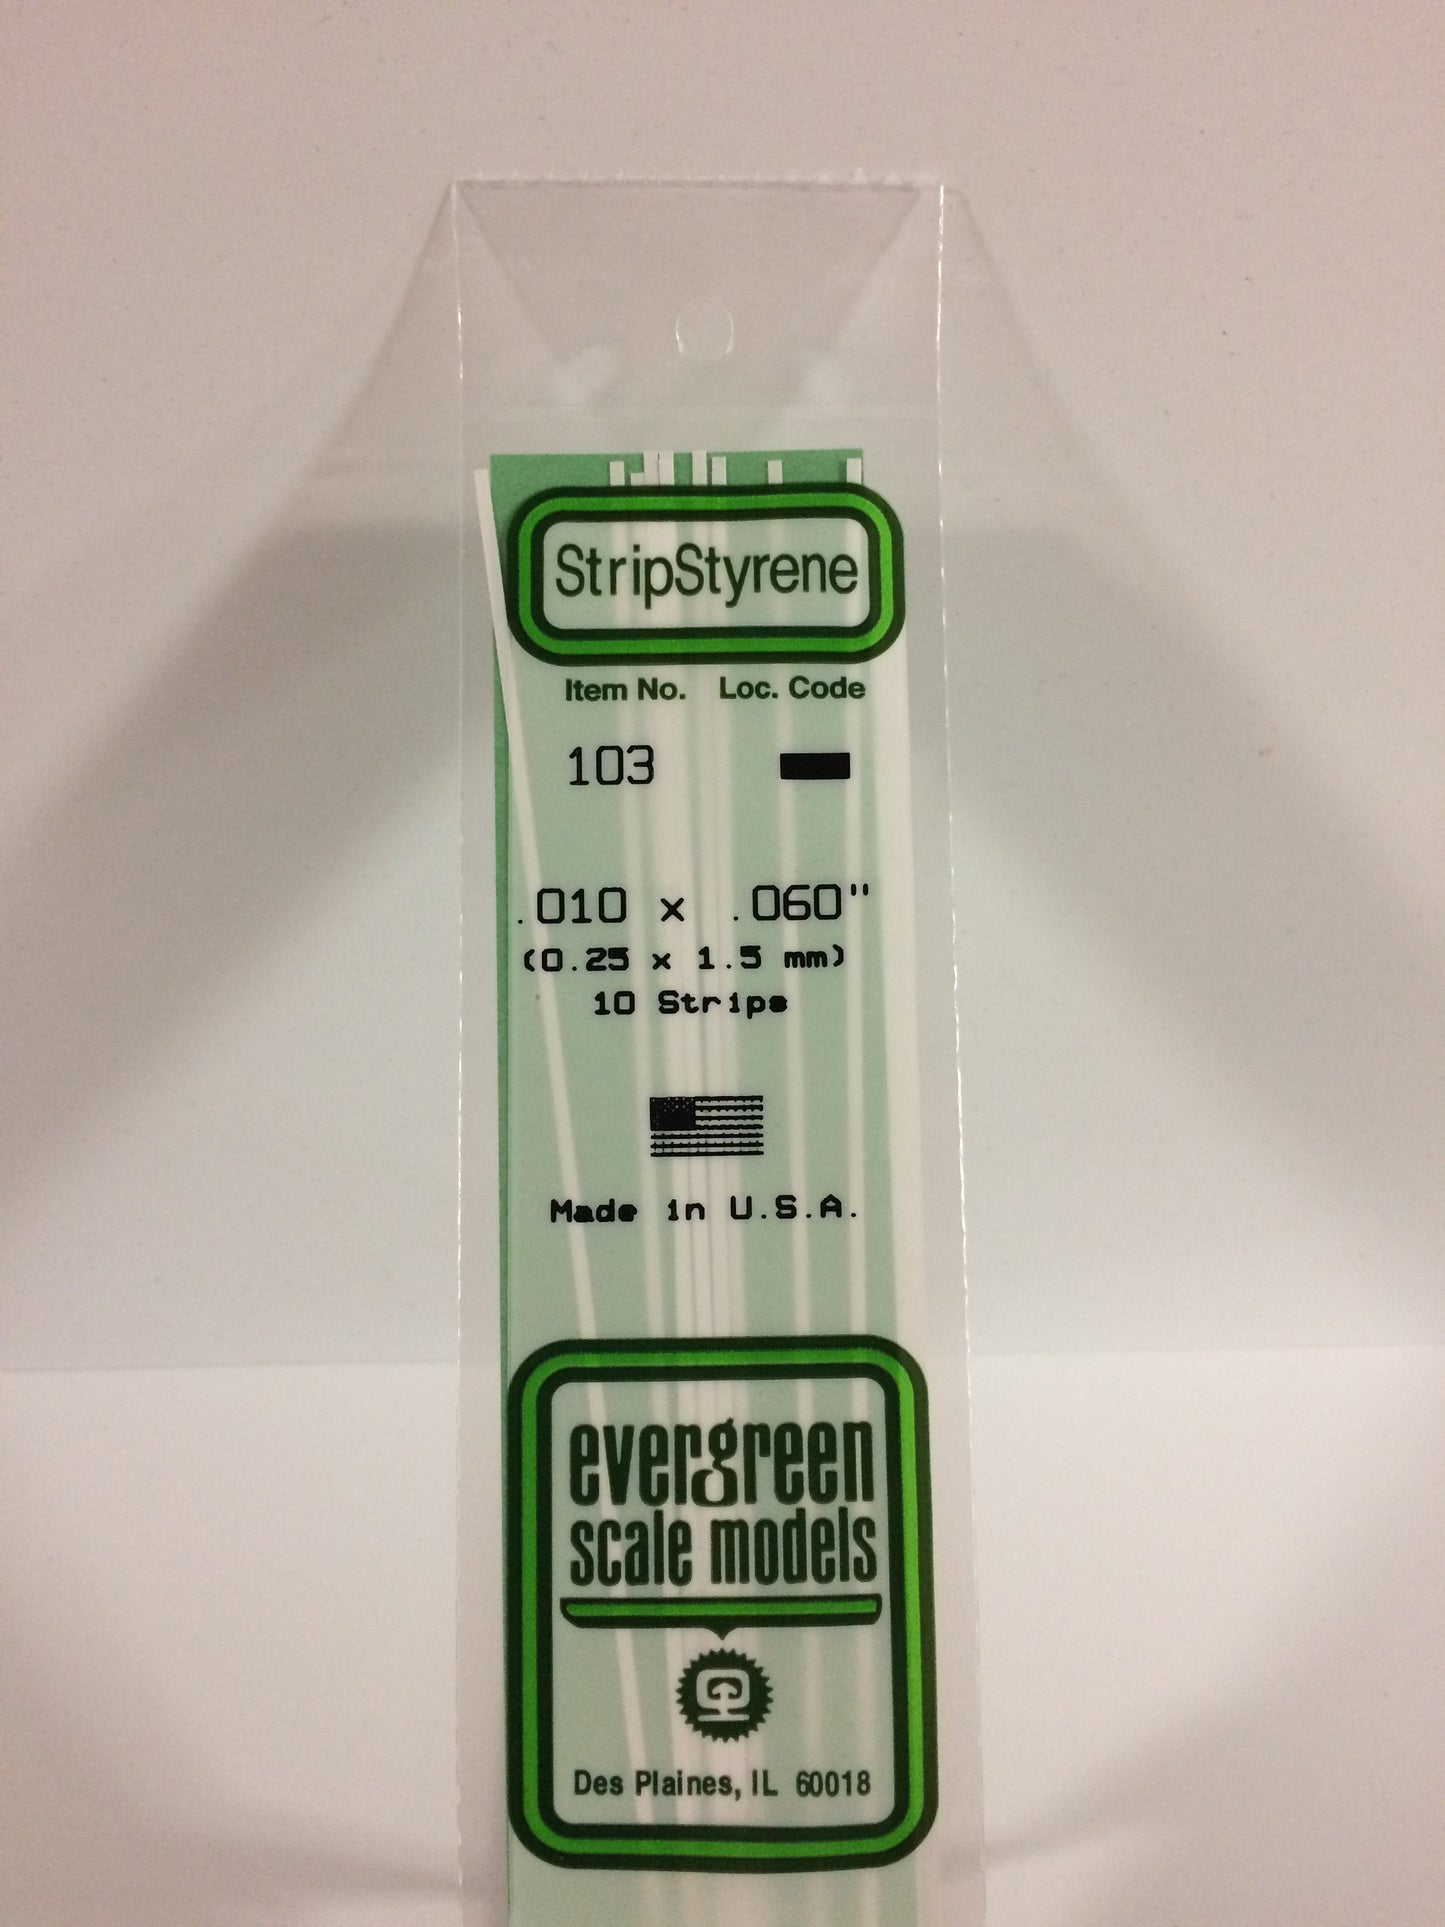 Evergreen Scale Models 103 .010" x .060" x 14" Polystyrene Strips (Pack of 10)